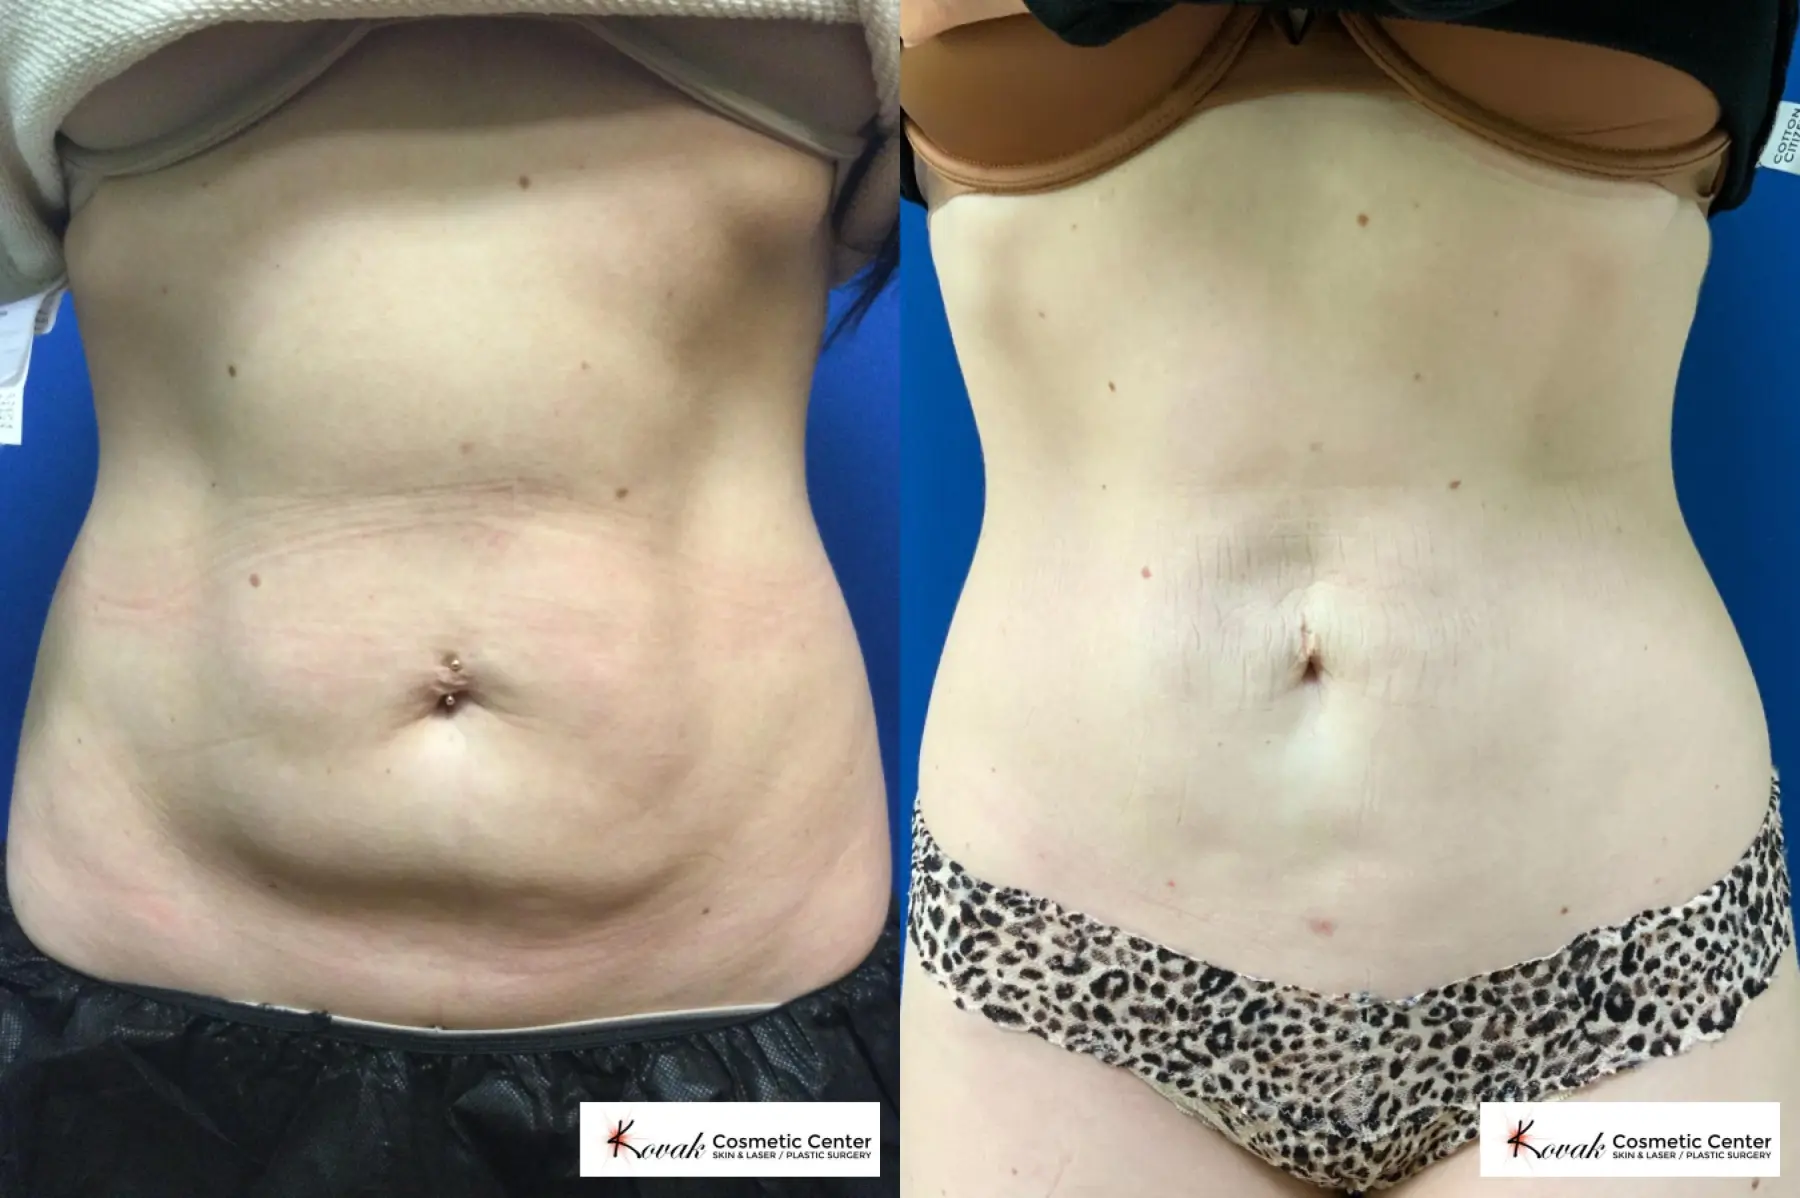  Vaser Liposuction with 8 Emsculpt Neo Treatments on a 28 year old woman - Before and After 1